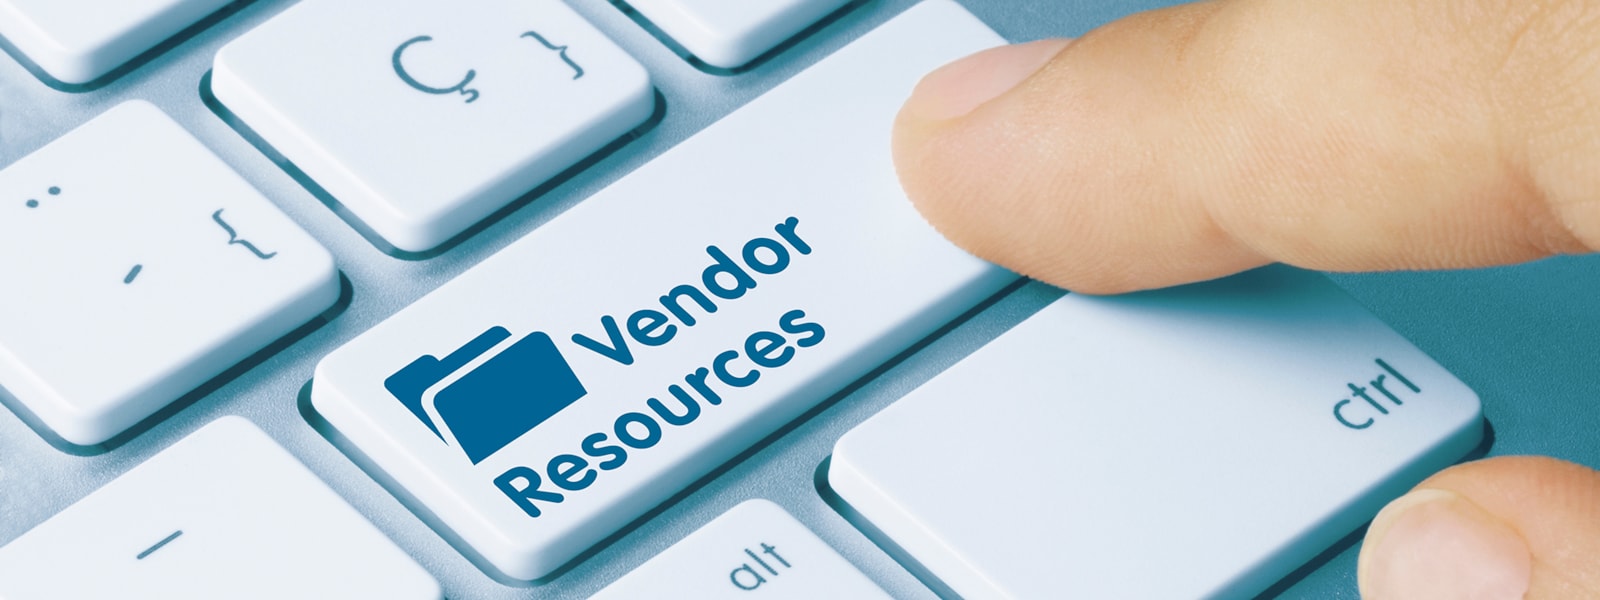 finger pushes keyboard button saying vendor resources